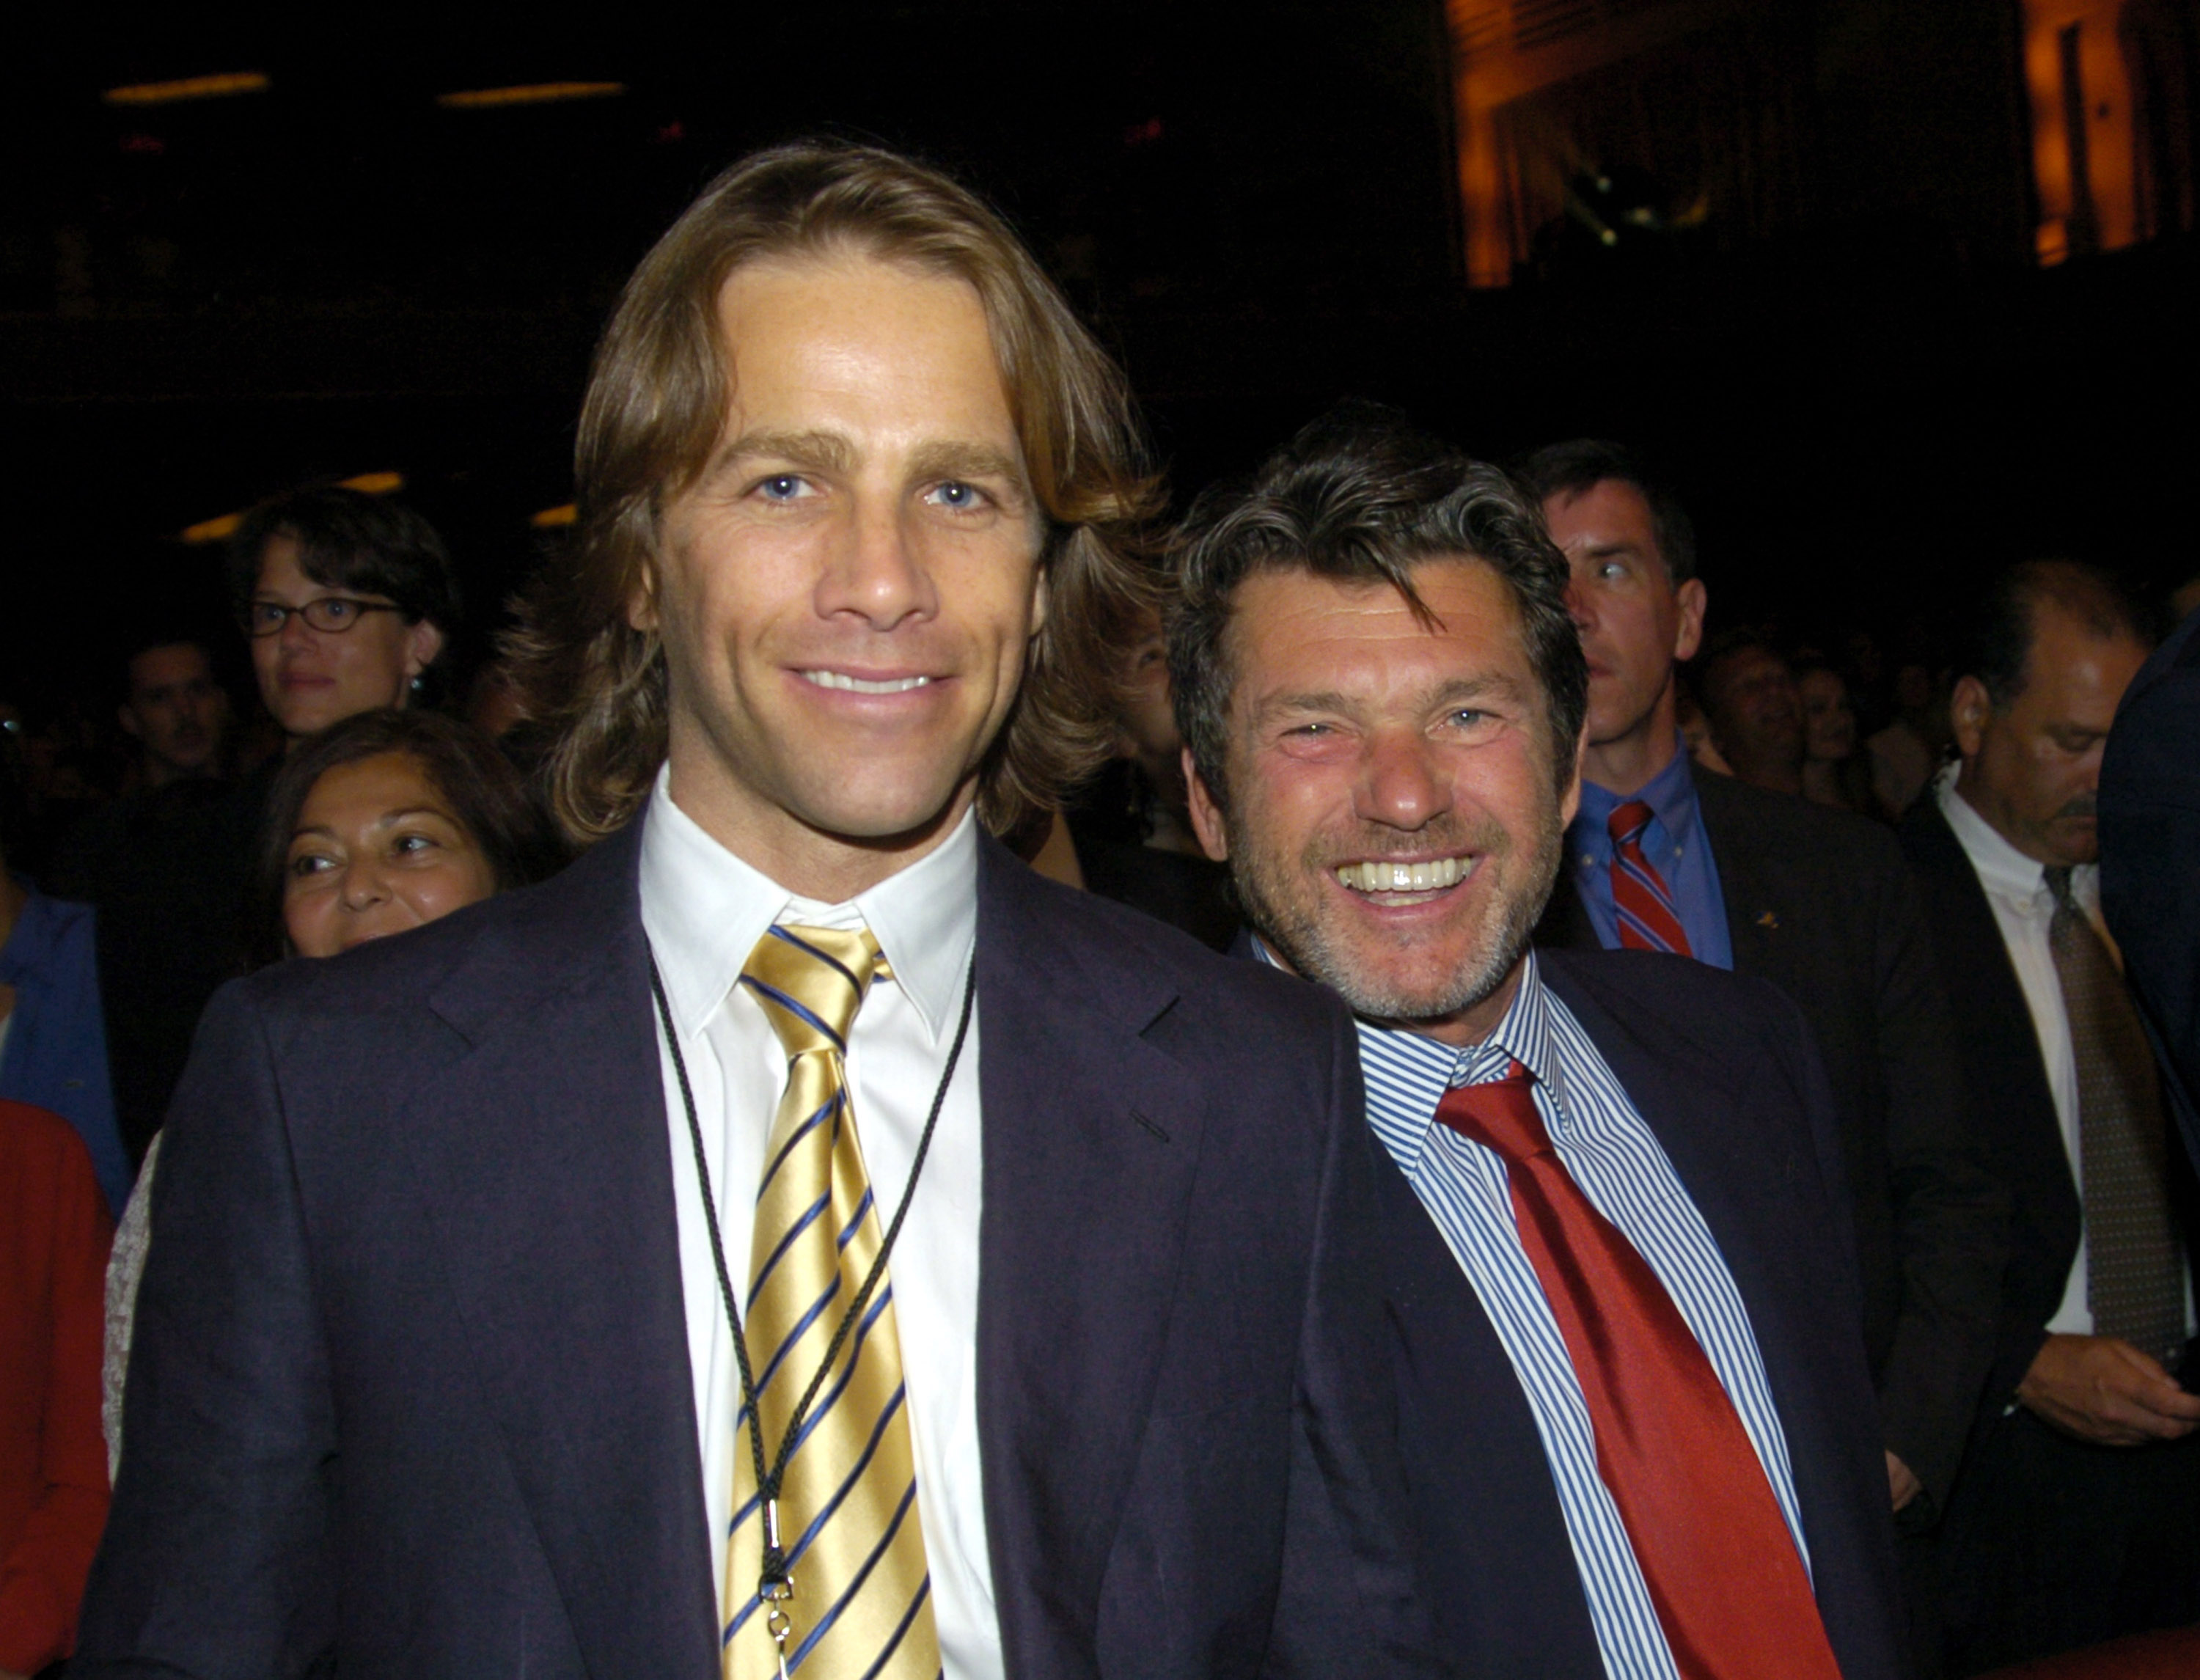 Matt Nye and Jann Wenner at Radio City Music Hall in New York City on July 8, 2004. | Source: Getty Images